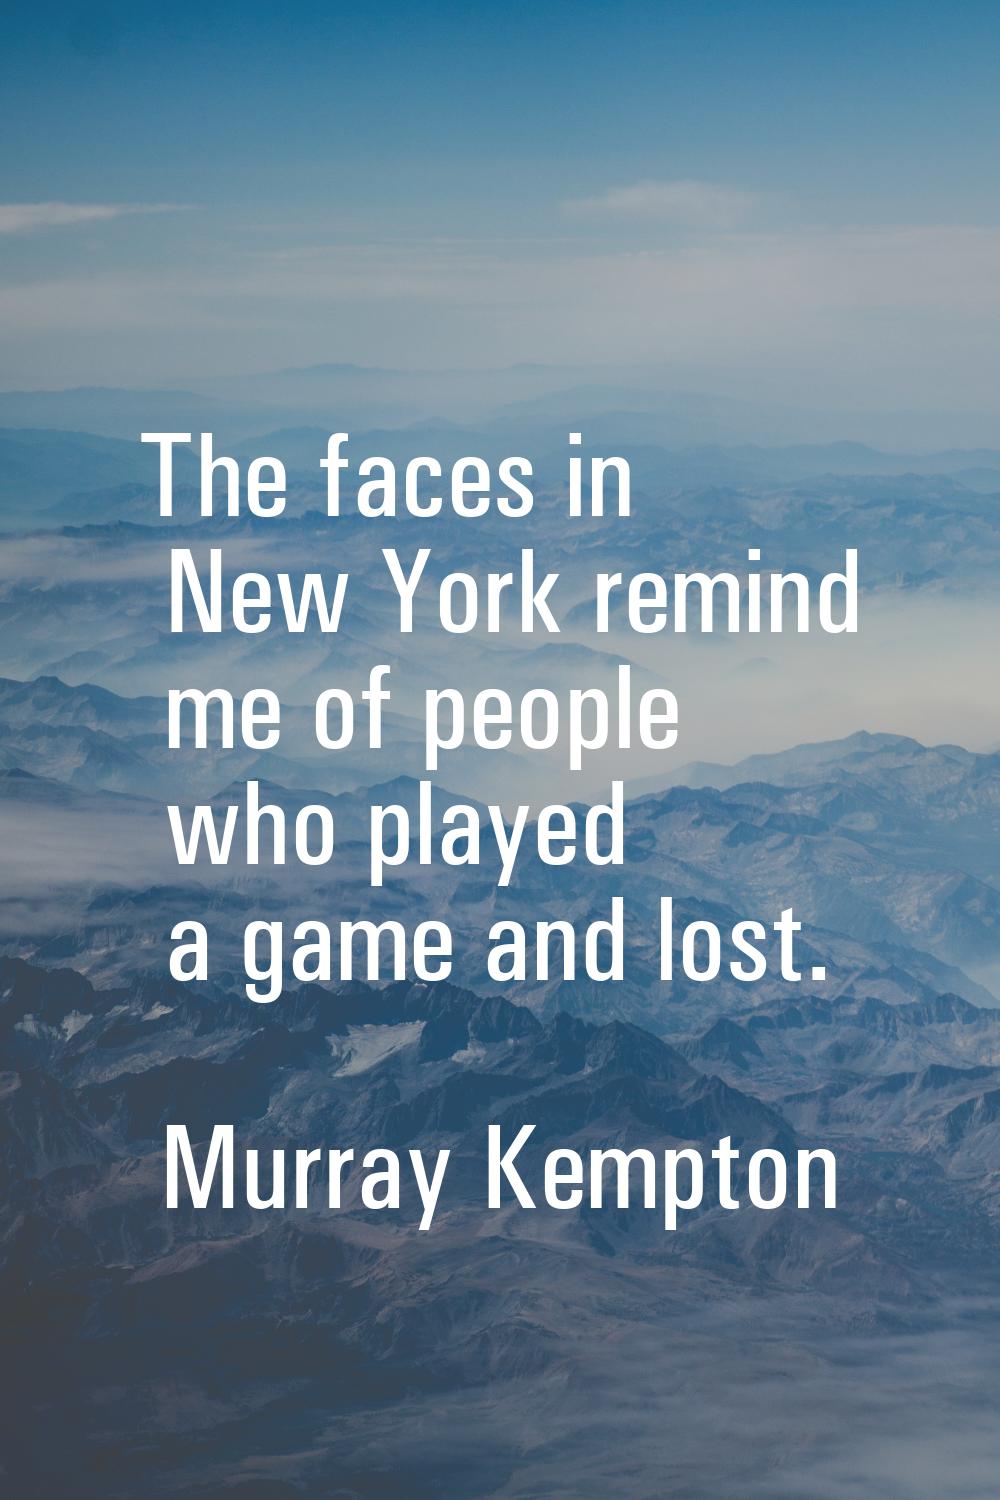 The faces in New York remind me of people who played a game and lost.